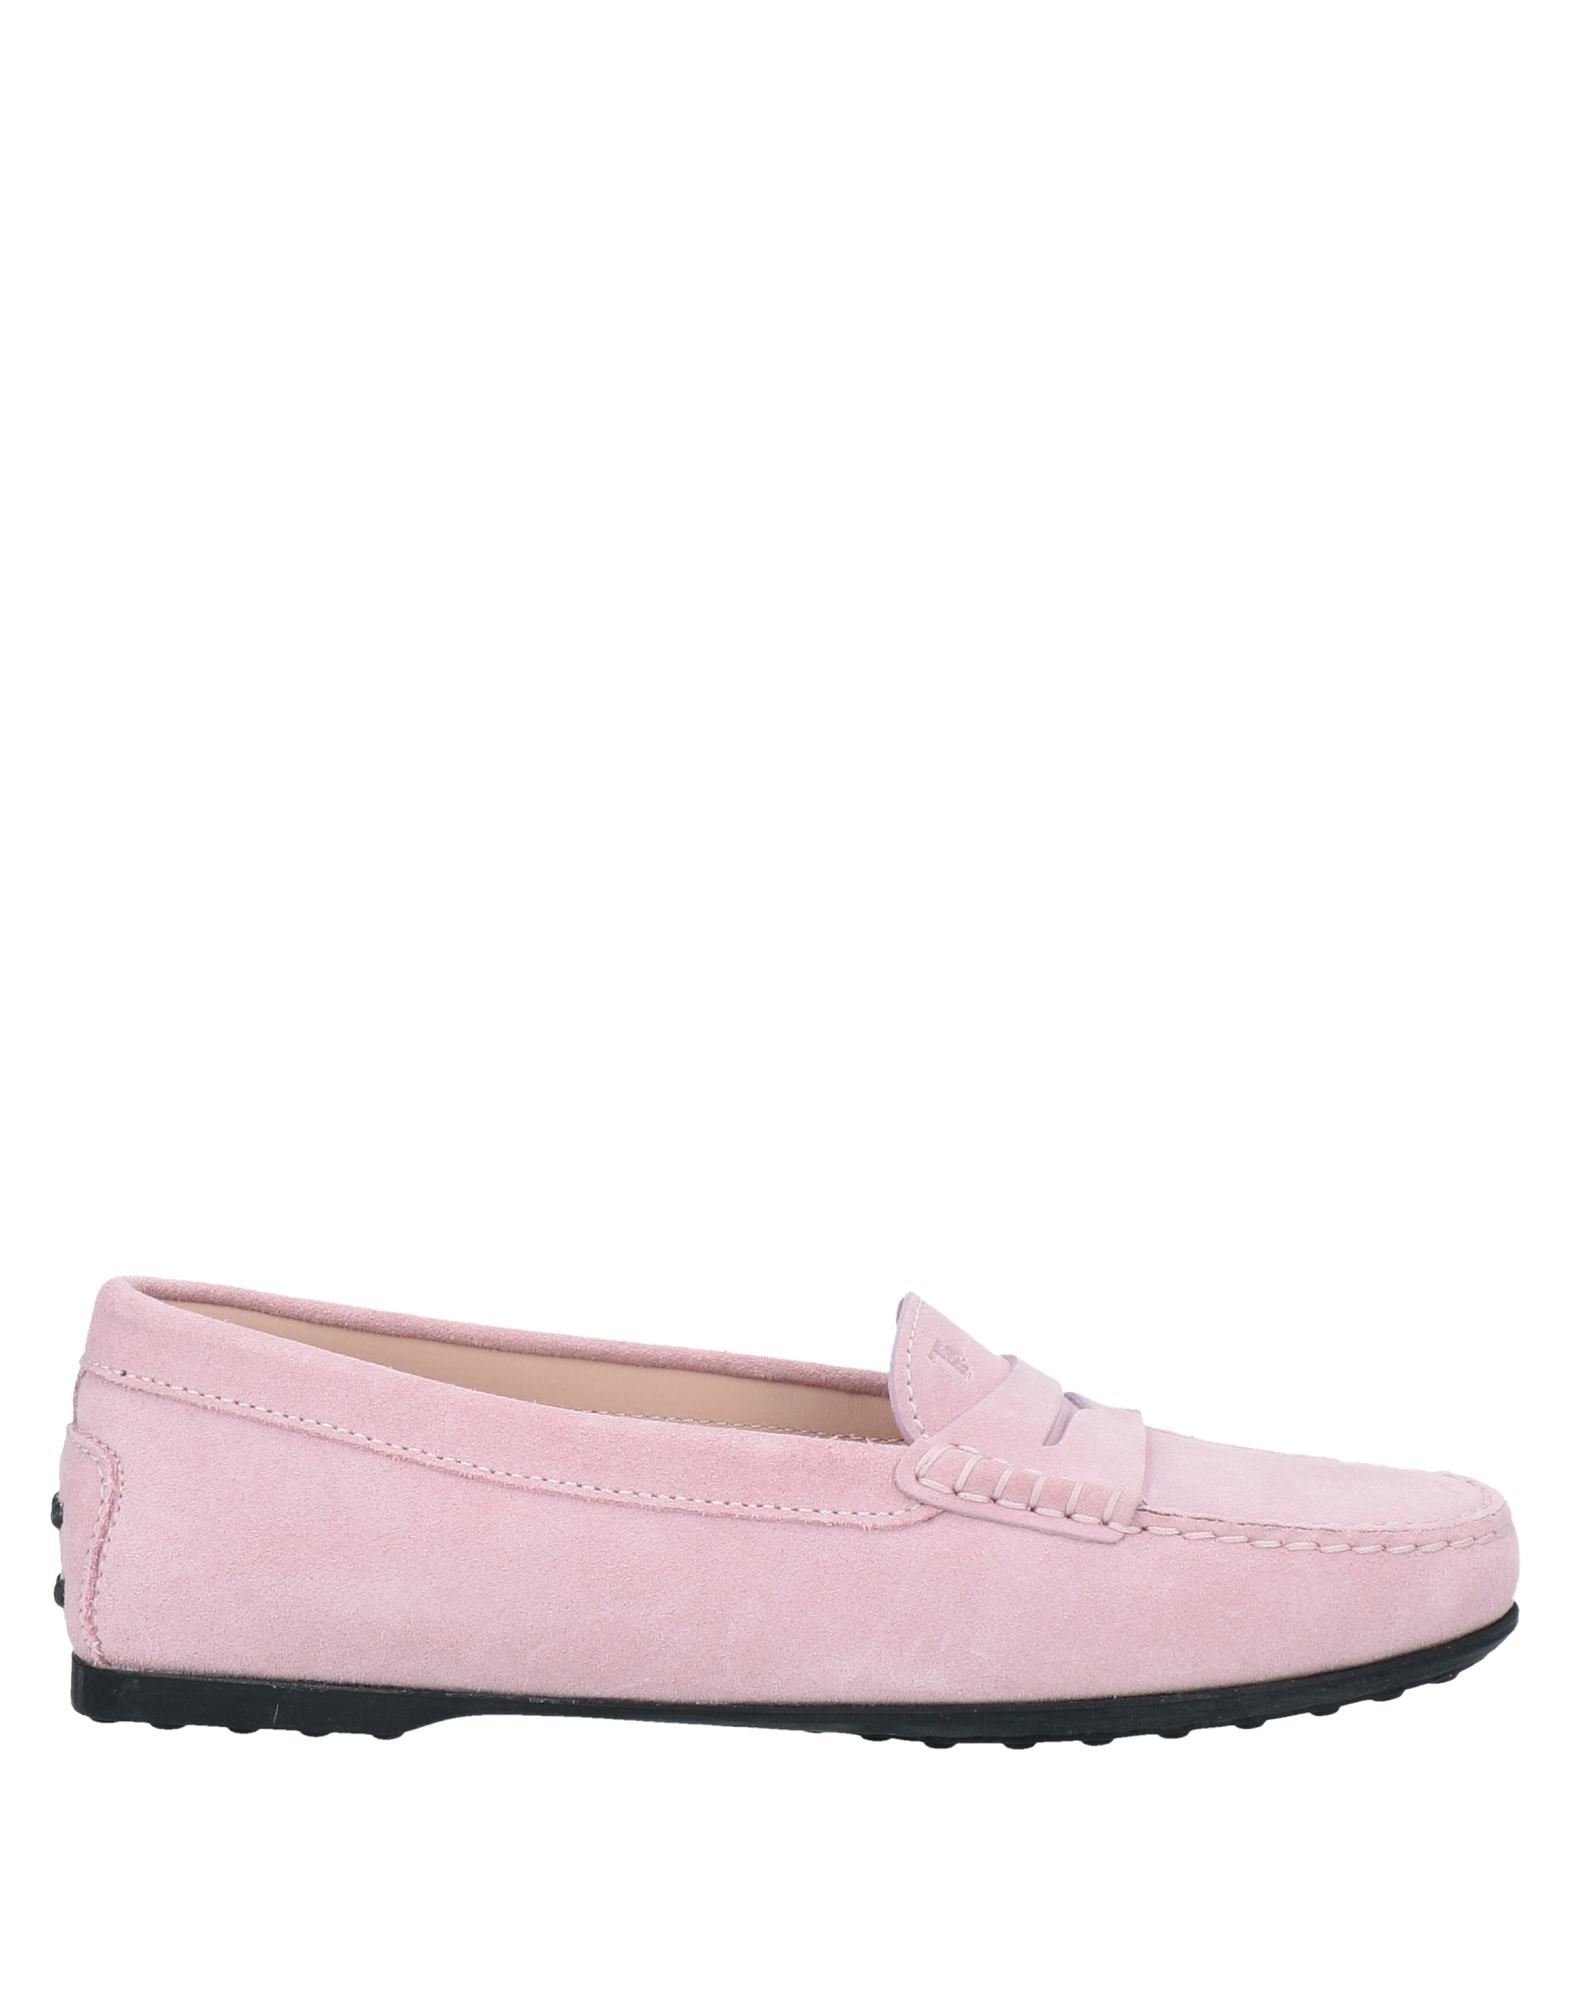 TOD'S TOD'S WOMAN LOAFERS PINK SIZE 6.5 SOFT LEATHER